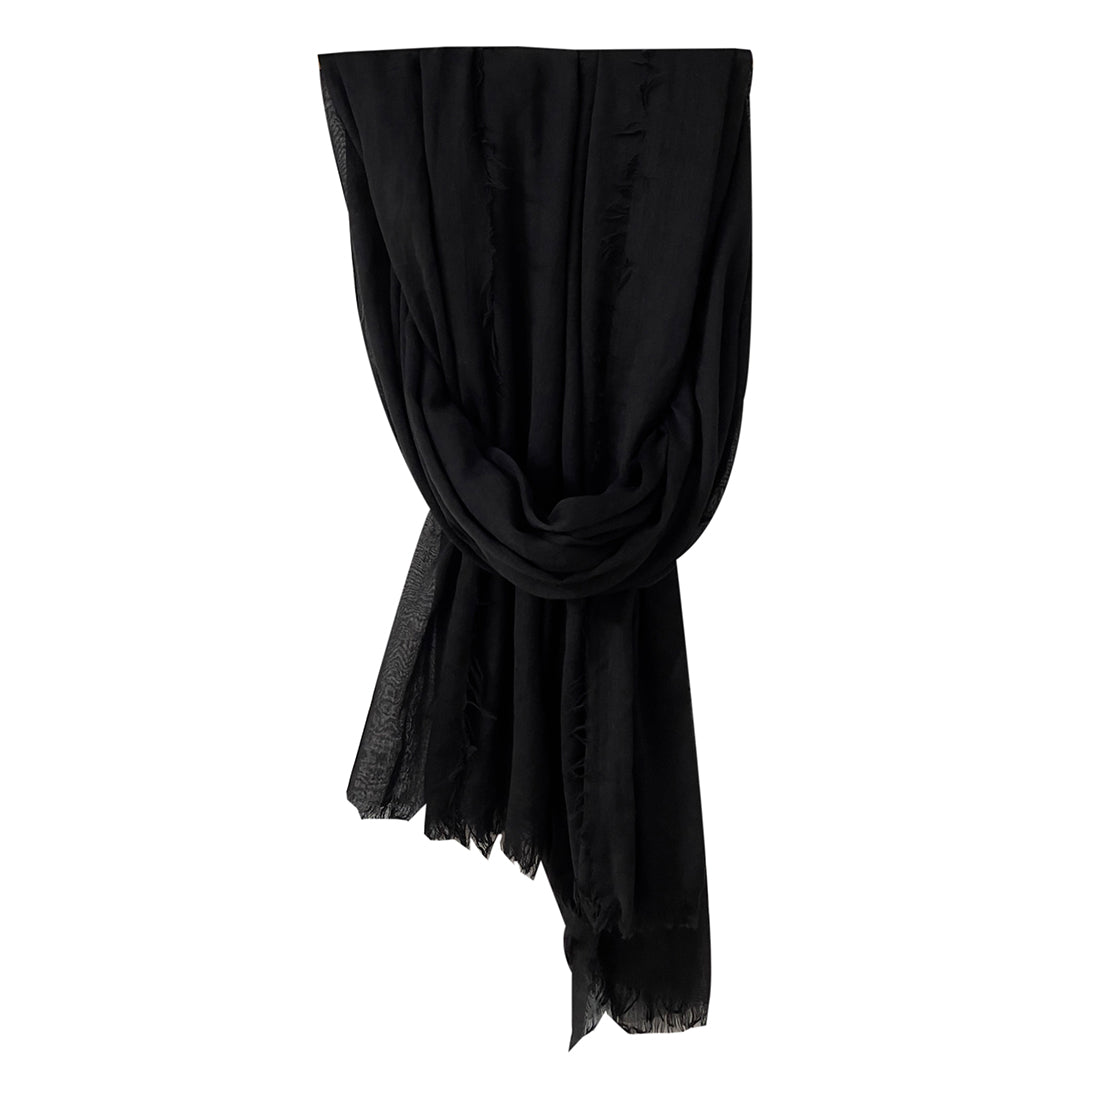 CONTEMPORARY SOLID BLACK SOFT POLYESTER SCARF